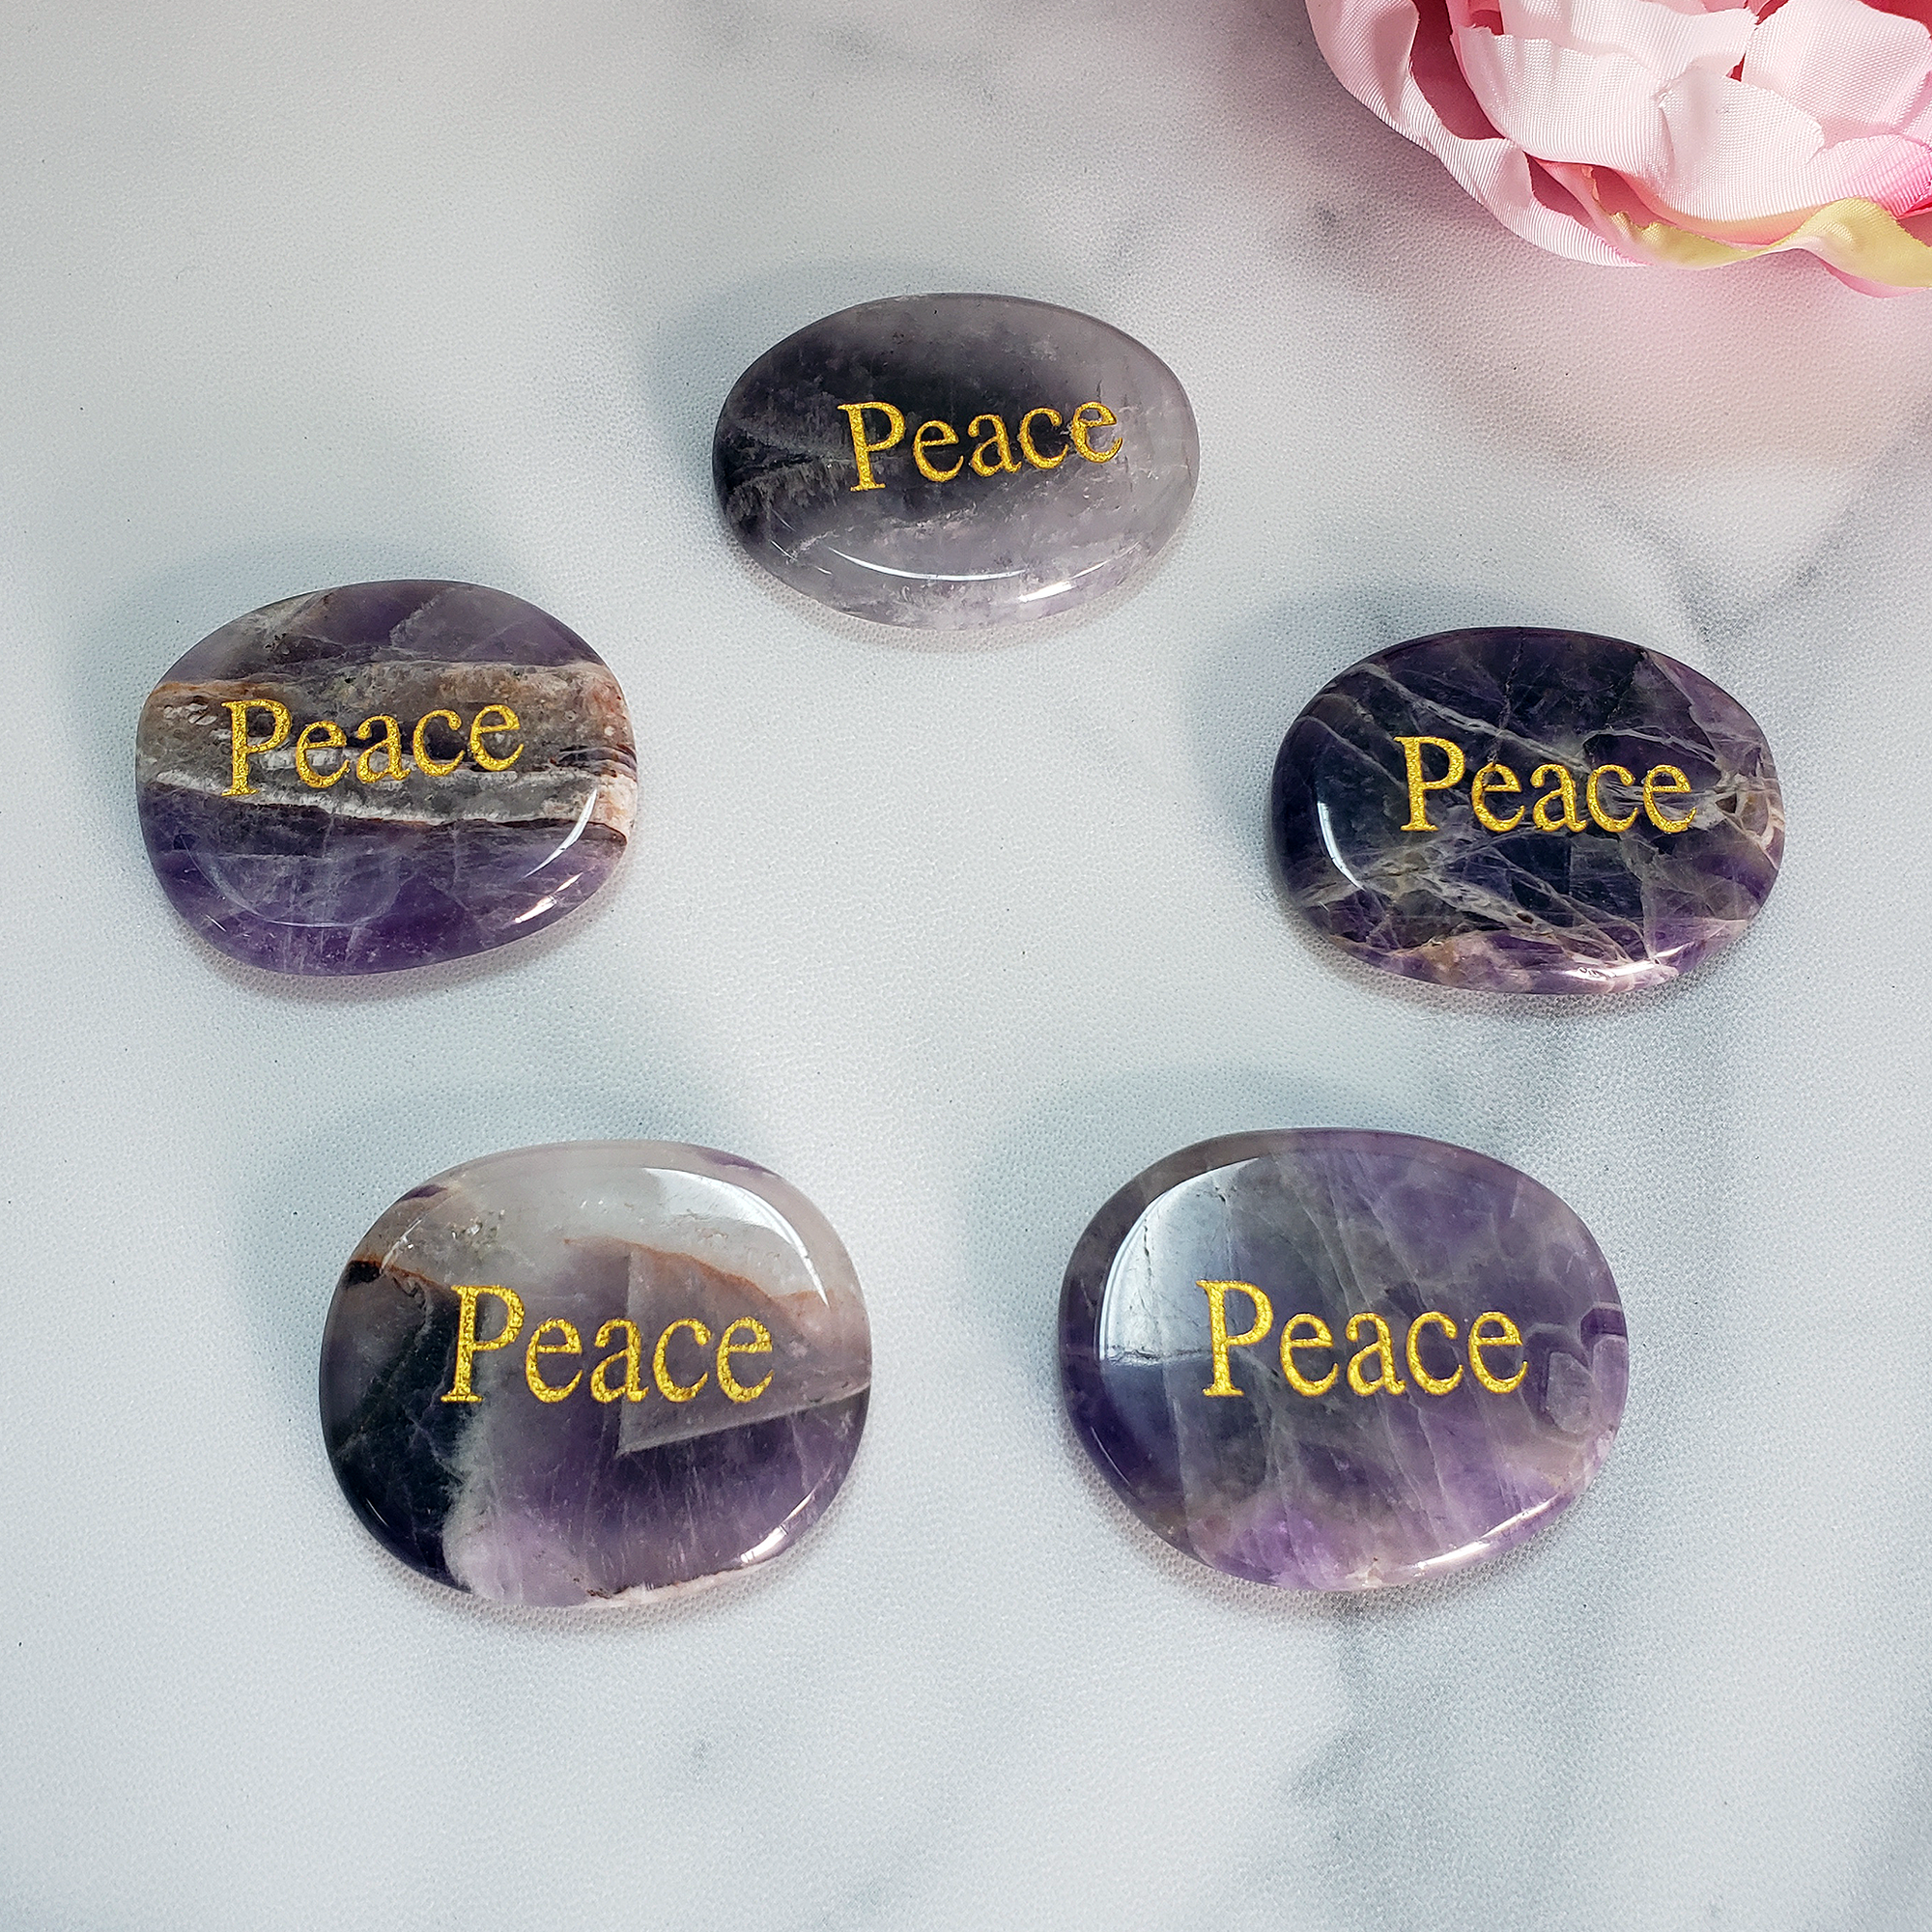 Amethyst Peace Affirmation Palm Stone | Natural Crystal Worry Stone with "Peace" Engraving